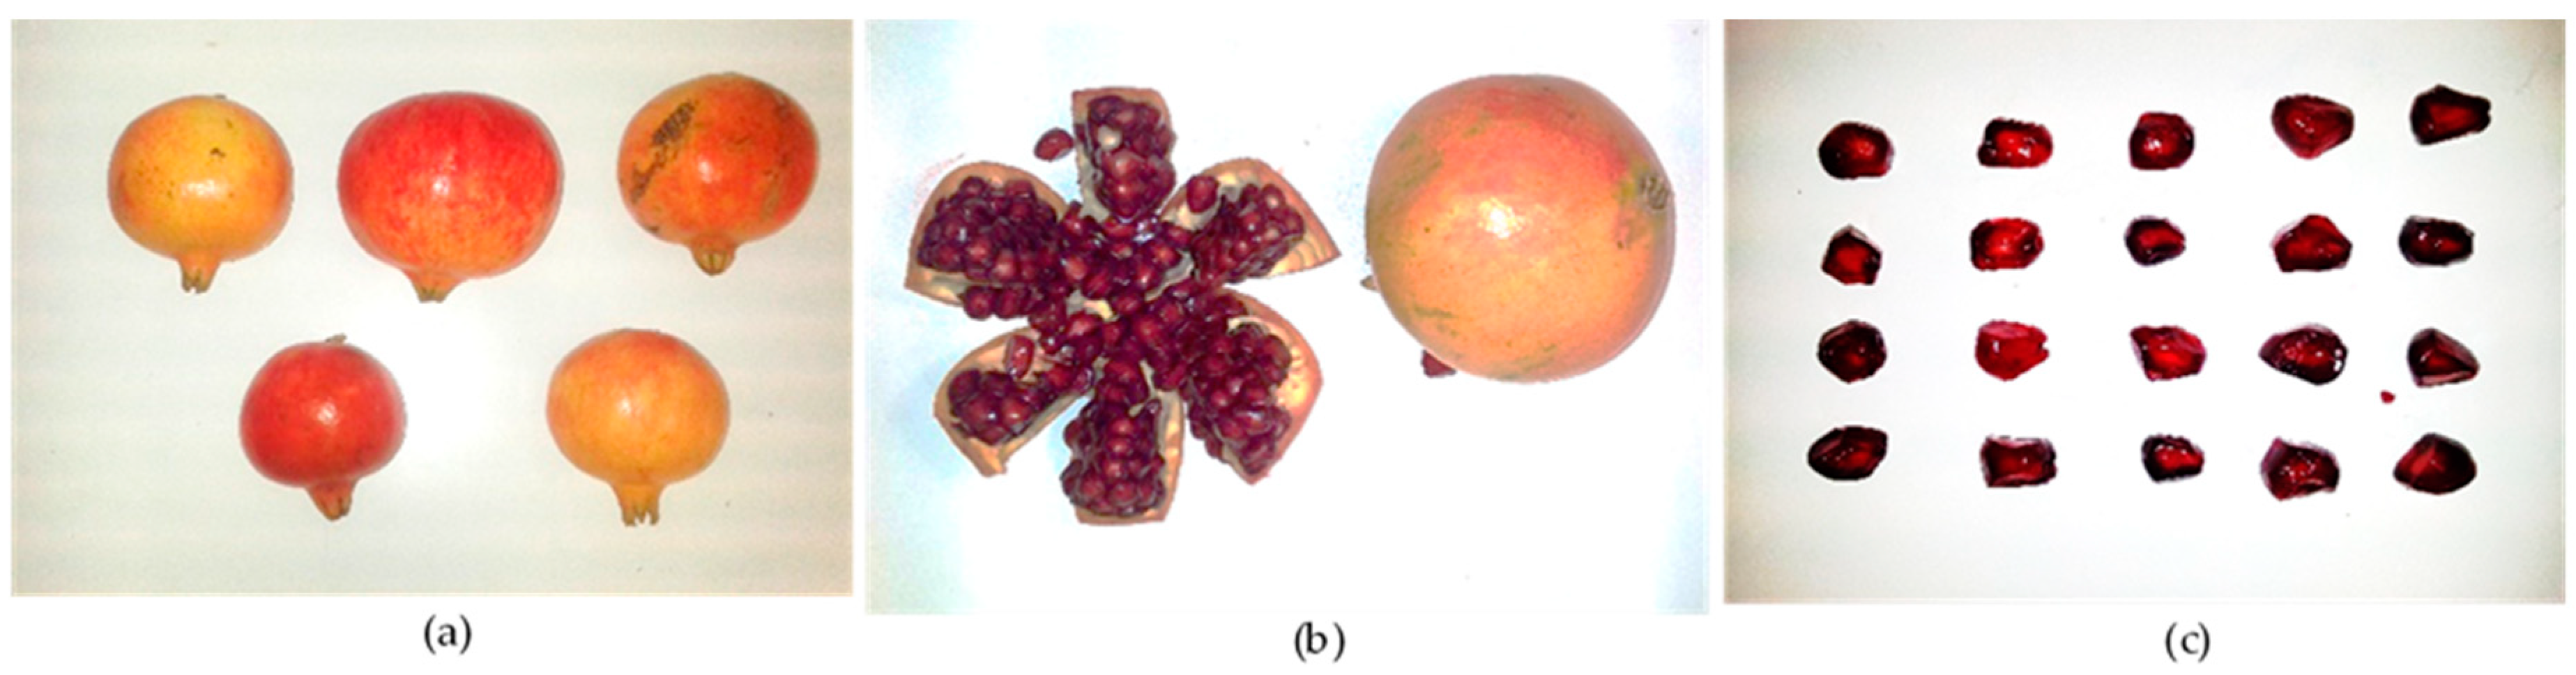 Agronomy | Free Full-Text | Pomegranate Cultivation in Mediterranean  Climate: Plant Adaptation and Fruit Quality of 'Mollar de Elche' and  'Wonderful' Cultivars | HTML